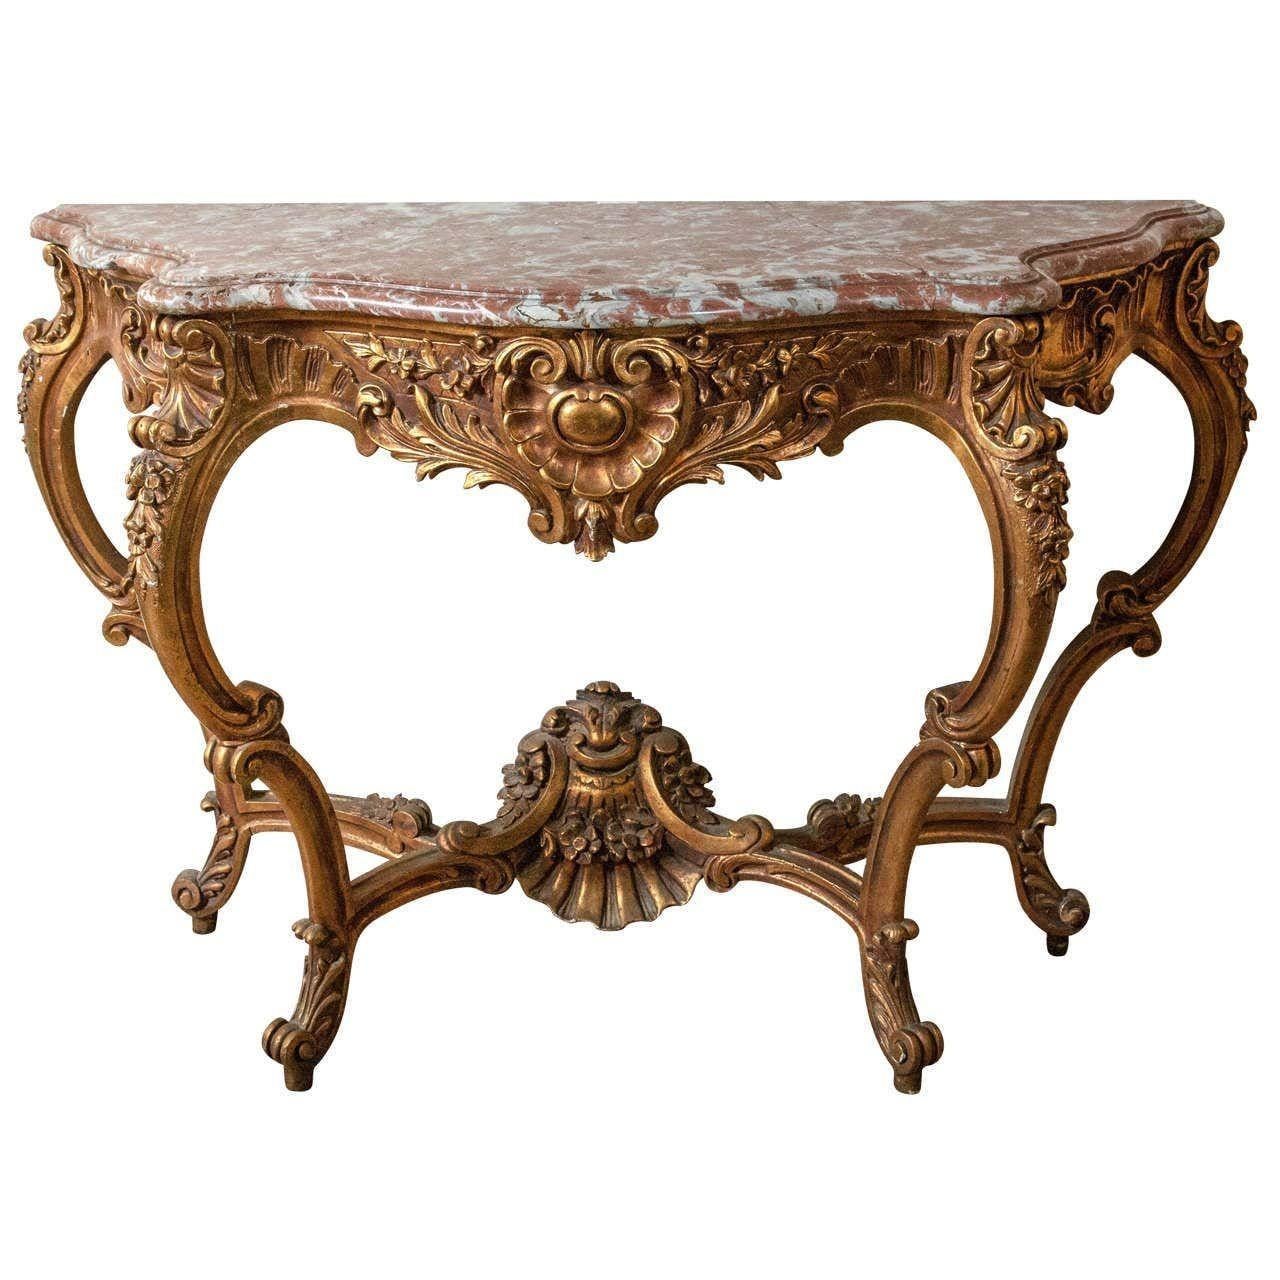 Marble-Top Louis XV Style Console Table by Jansen Exquisite Carved Details 1920s For Sale